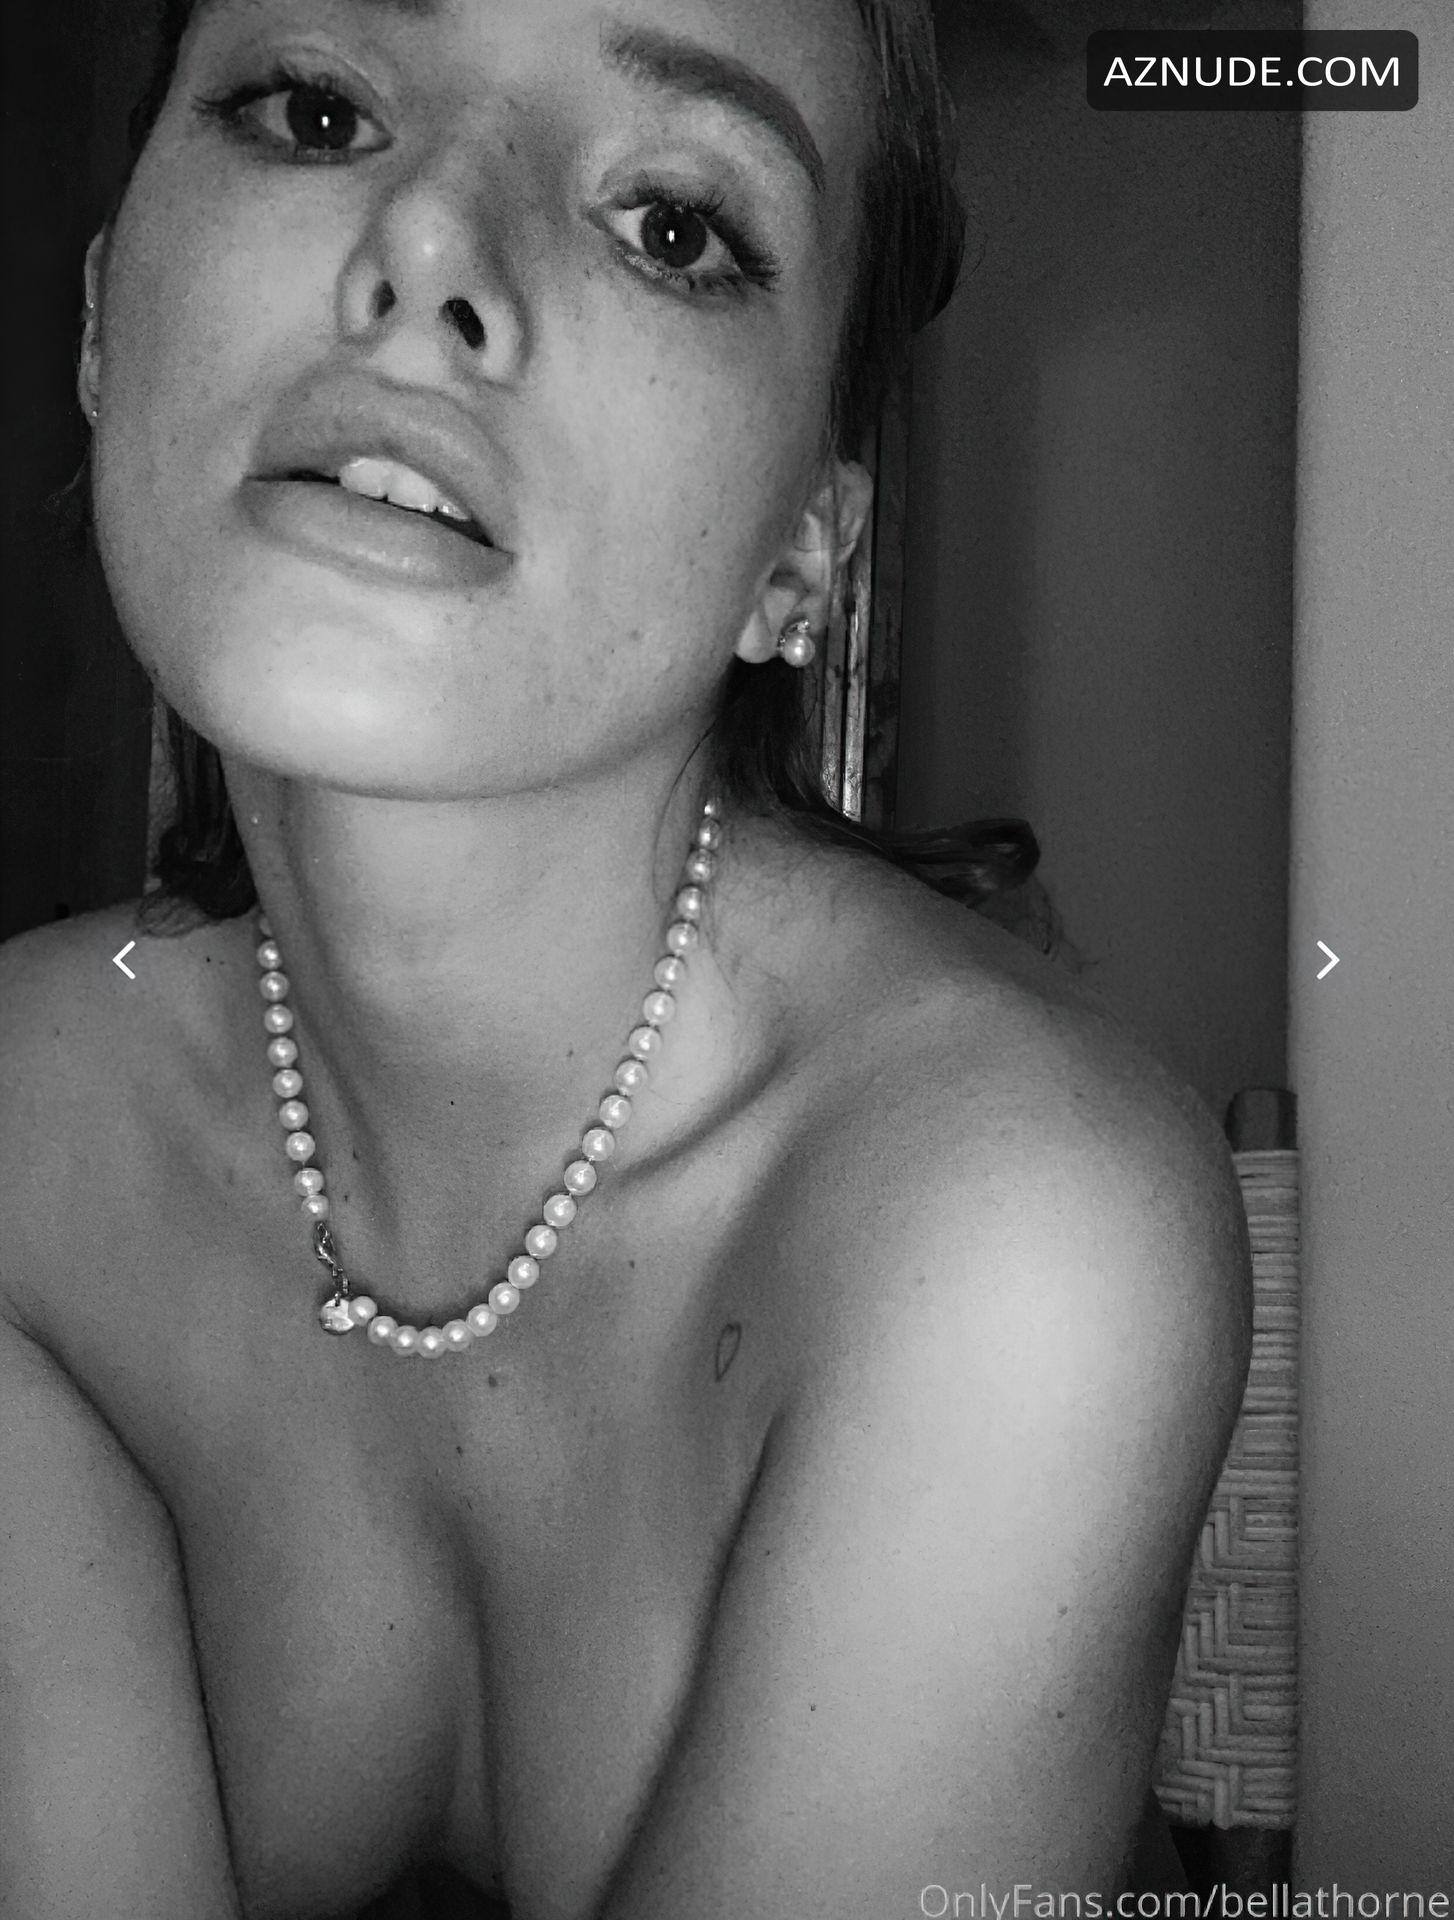 Bella Thorne Nude Photos From Onlyfans August 2020 Aznude